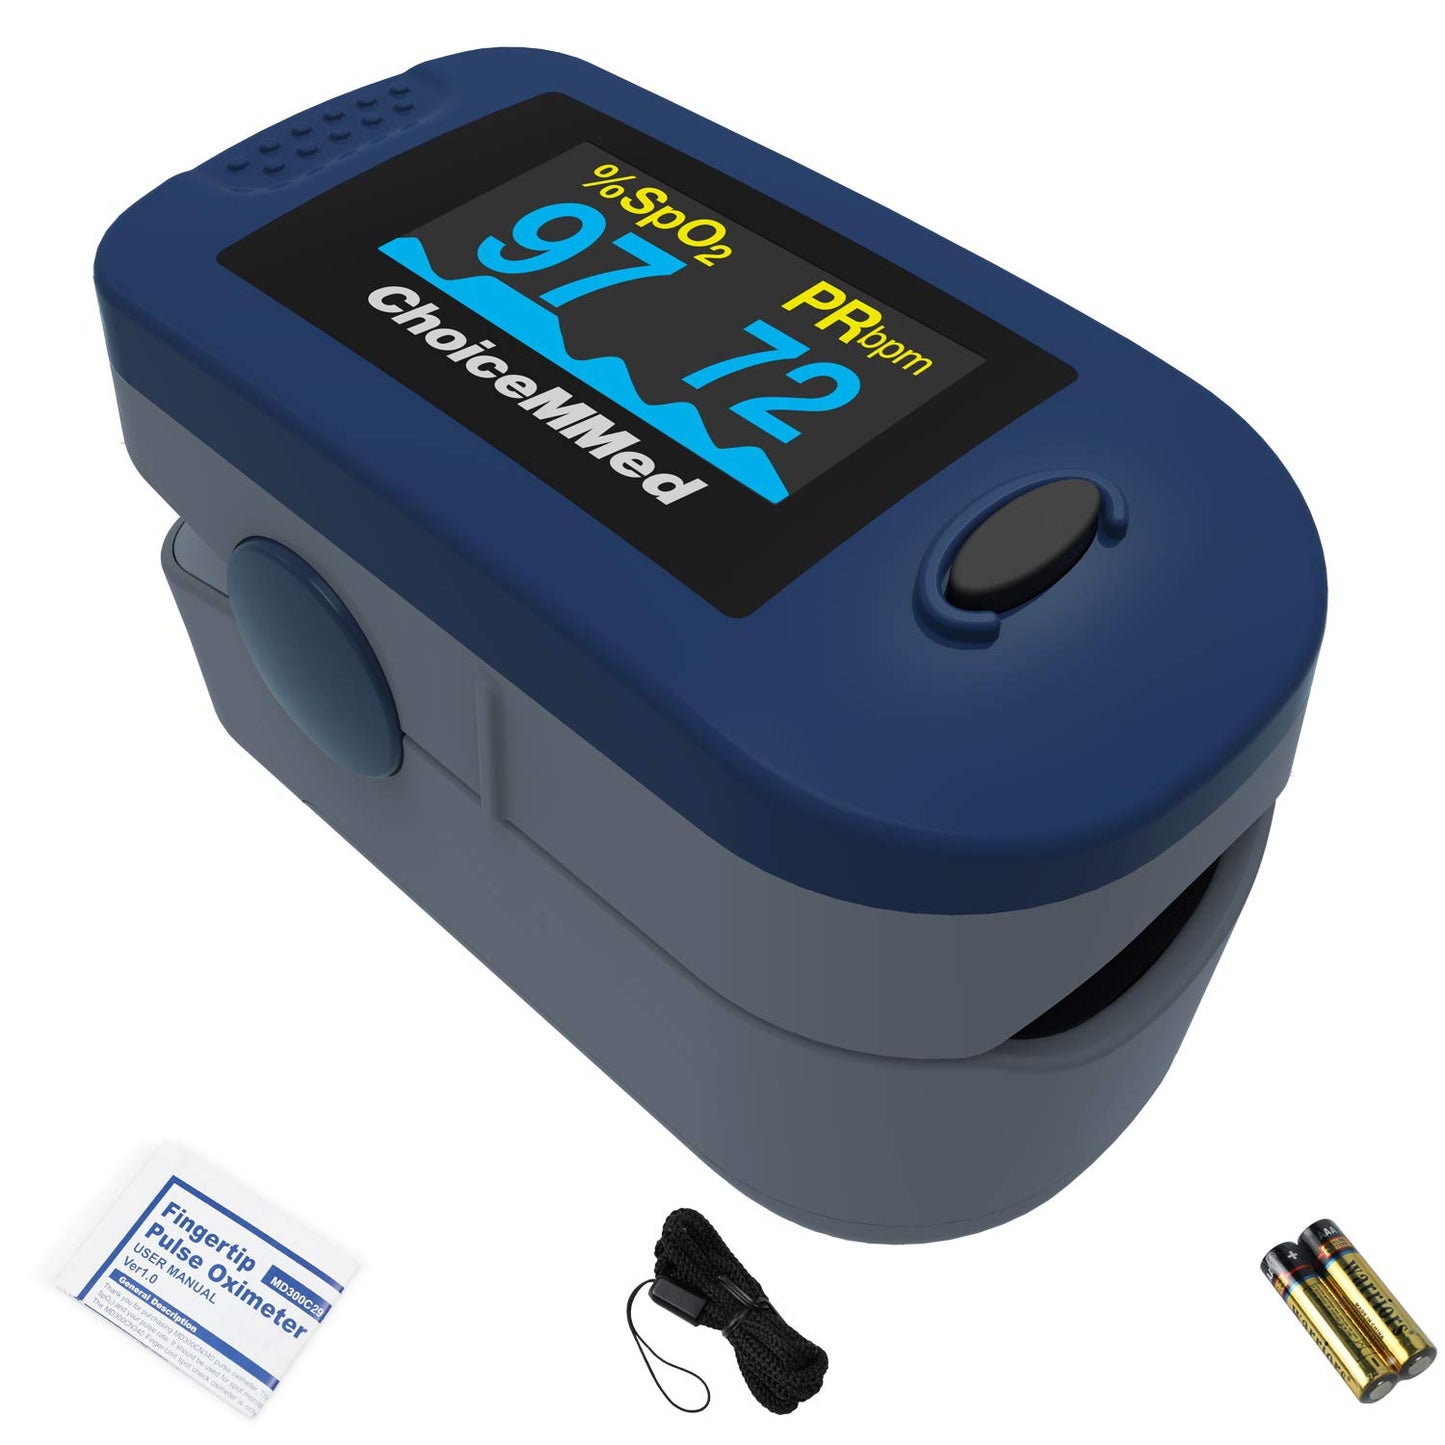 Choicemmed MD 300C2D Pulse Oximeter (White/Brown)